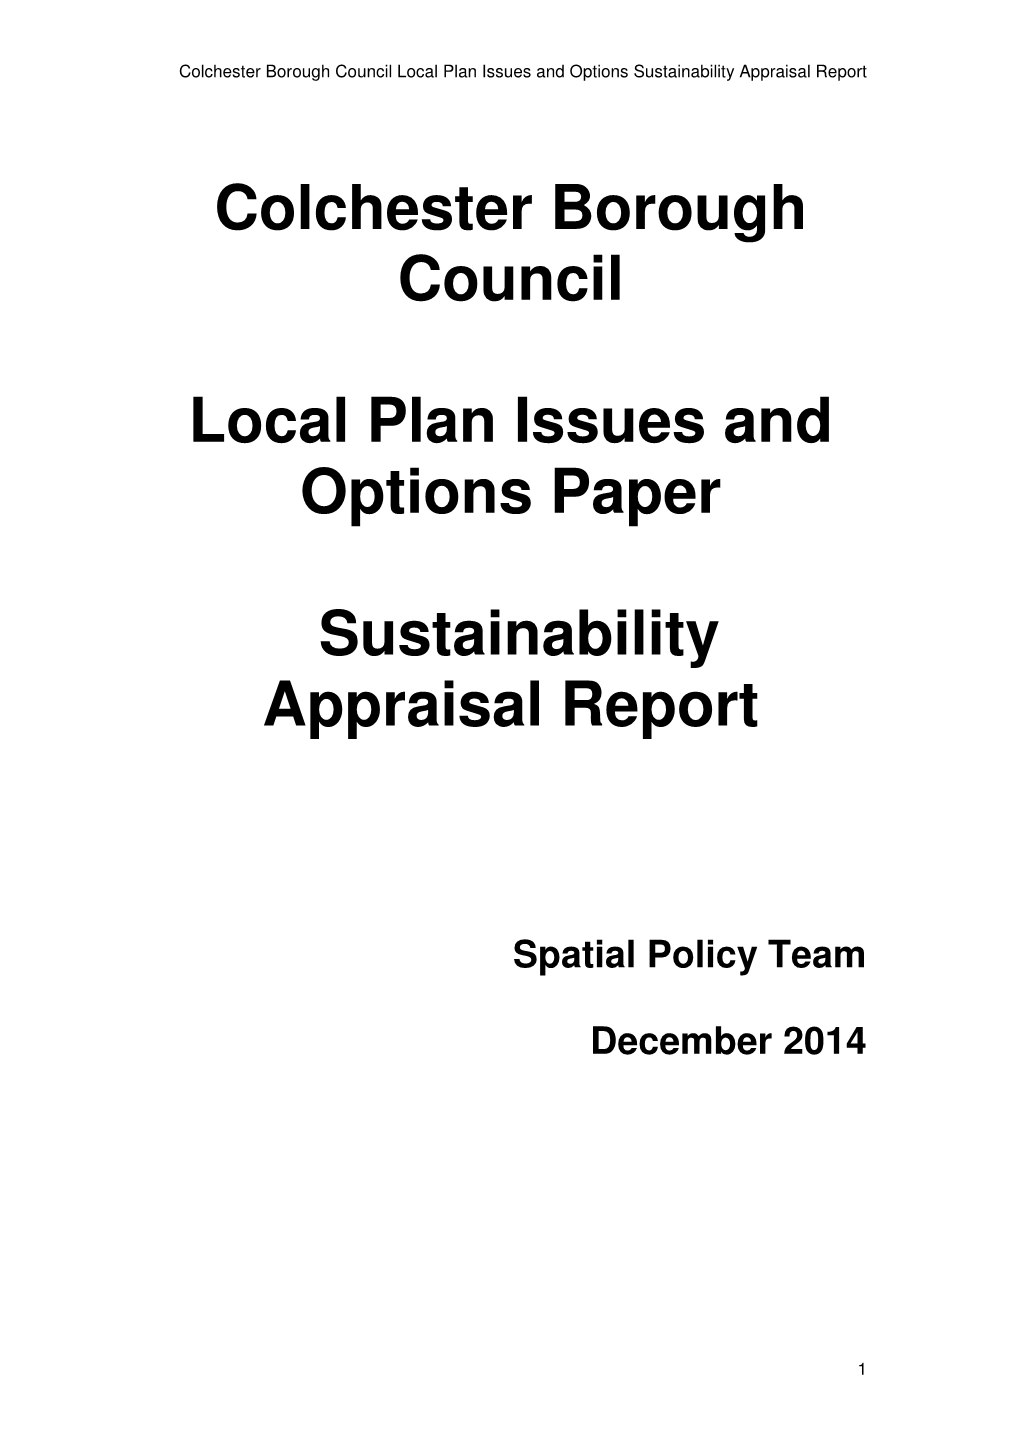 Colchester Borough Council Local Plan Issues and Options Paper